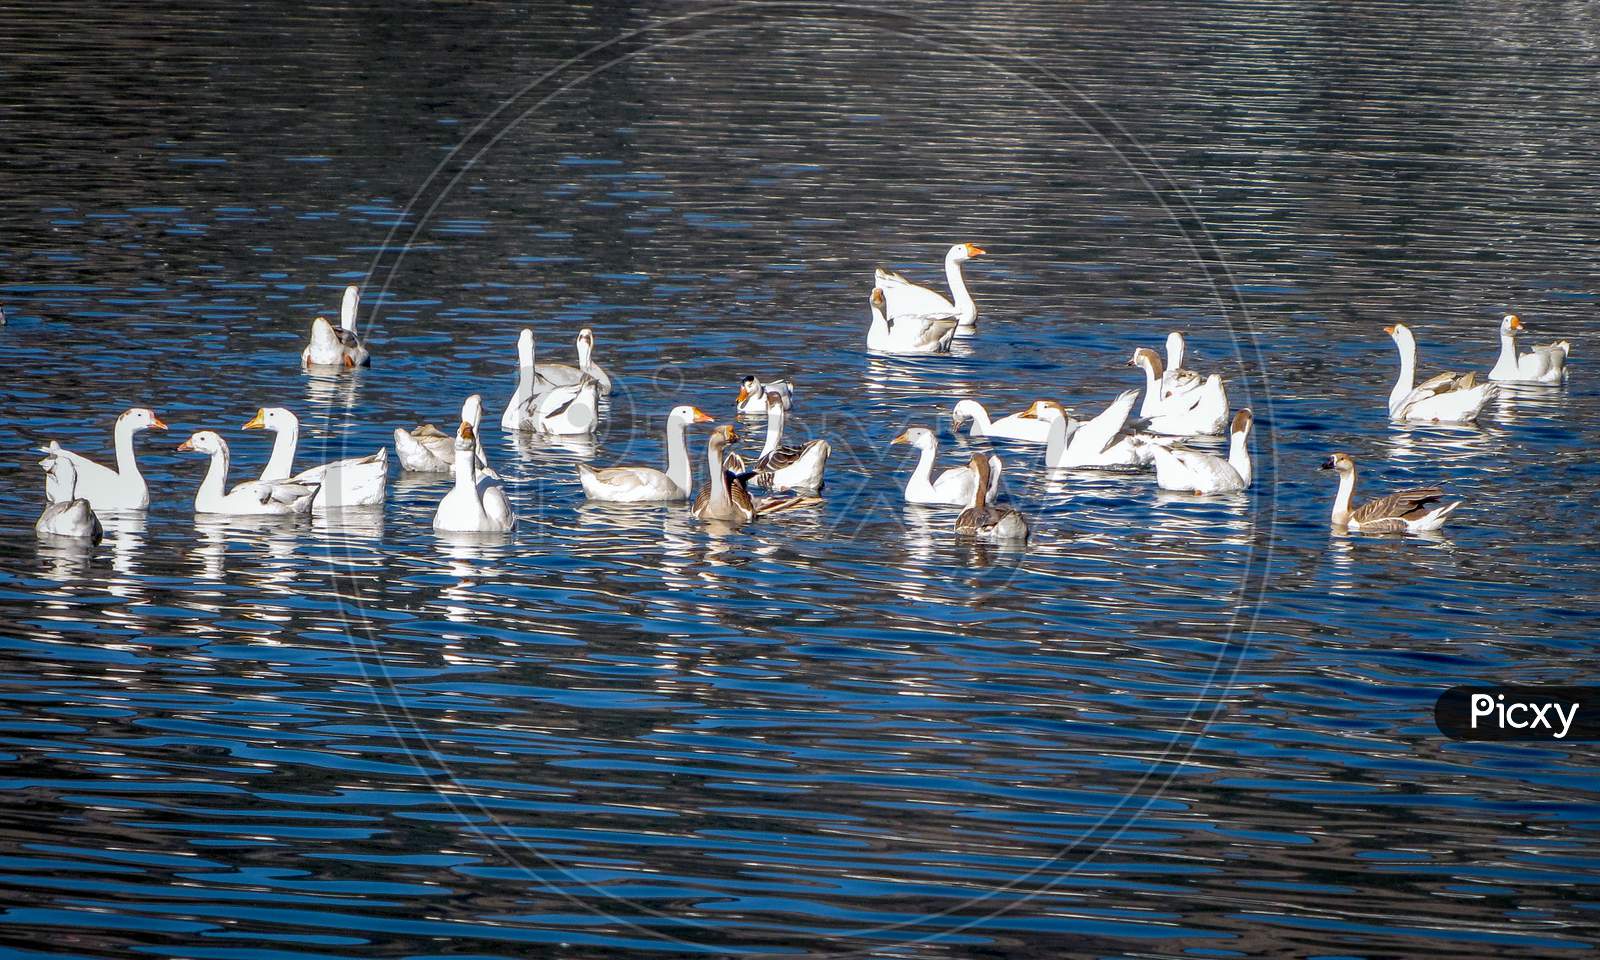 A Flock Of White Ducklings Swimming In Blue Water At Nainital, India.